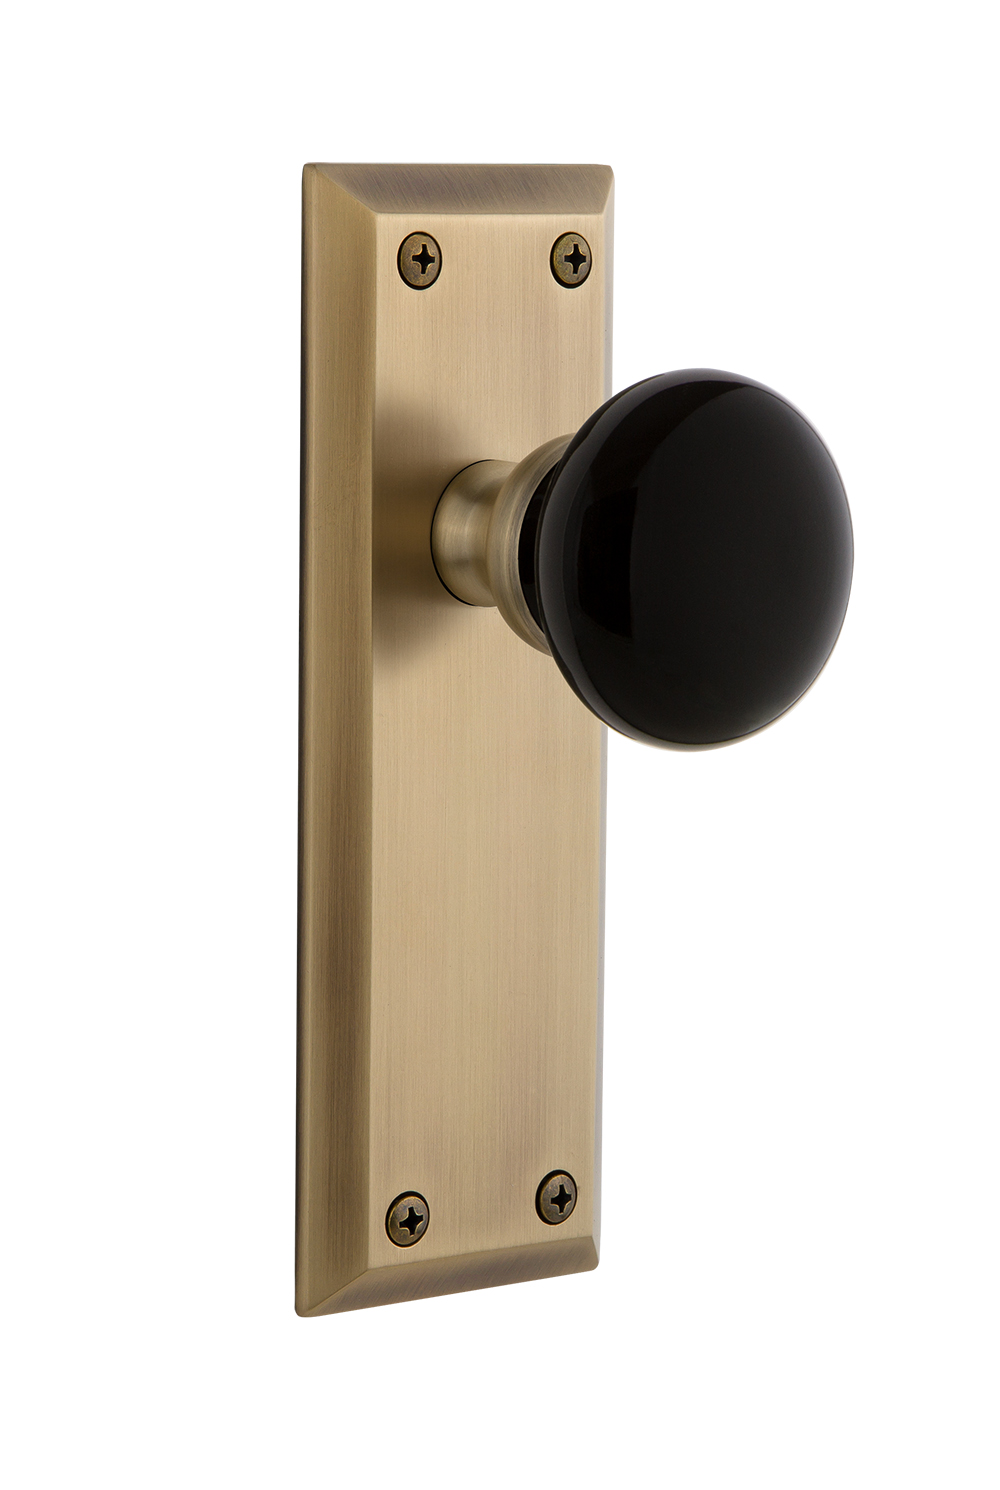 Check out why this upgrade is totally worth the splurge, Jeweled interiors, Jewel Marlowe, replacing door handles, ways to add value to your home,  grandeur hardware, coventry knob, fifth avenue backplate, interior door handle, brass backplate, brass door handle, black door knob, Chantilly lace, BM